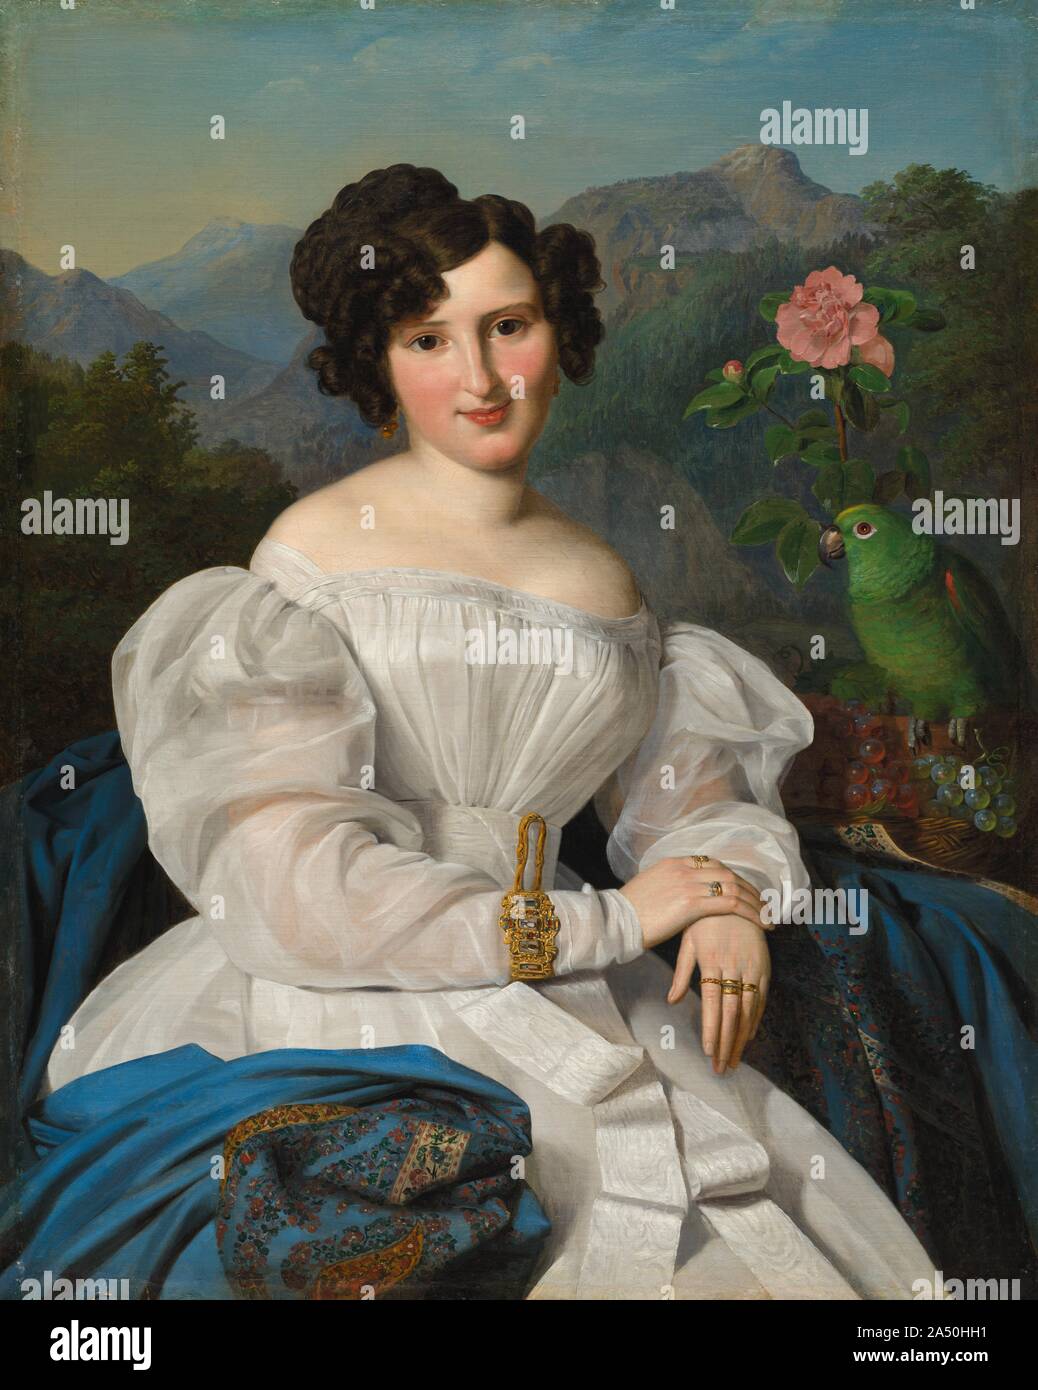 Countess Sz&#xe9;chenyi, 1828. This portrait typifies painting in Vienna between 1815 and 1865, an era known as the Biedermeier period, during which the Hapsburg government promoted positive artistic depictions of Viennese life and culture. The mountains in the background express both the artist's romantic fascination with nature and patriotic devotion to his Austrian homeland. The sitter, Crescentia Seilern, was a prestigious member of the aristocracy who married Hungarian reformist patriot Istv&#xe1;n Sz&#xe9;chenyi. Stock Photo